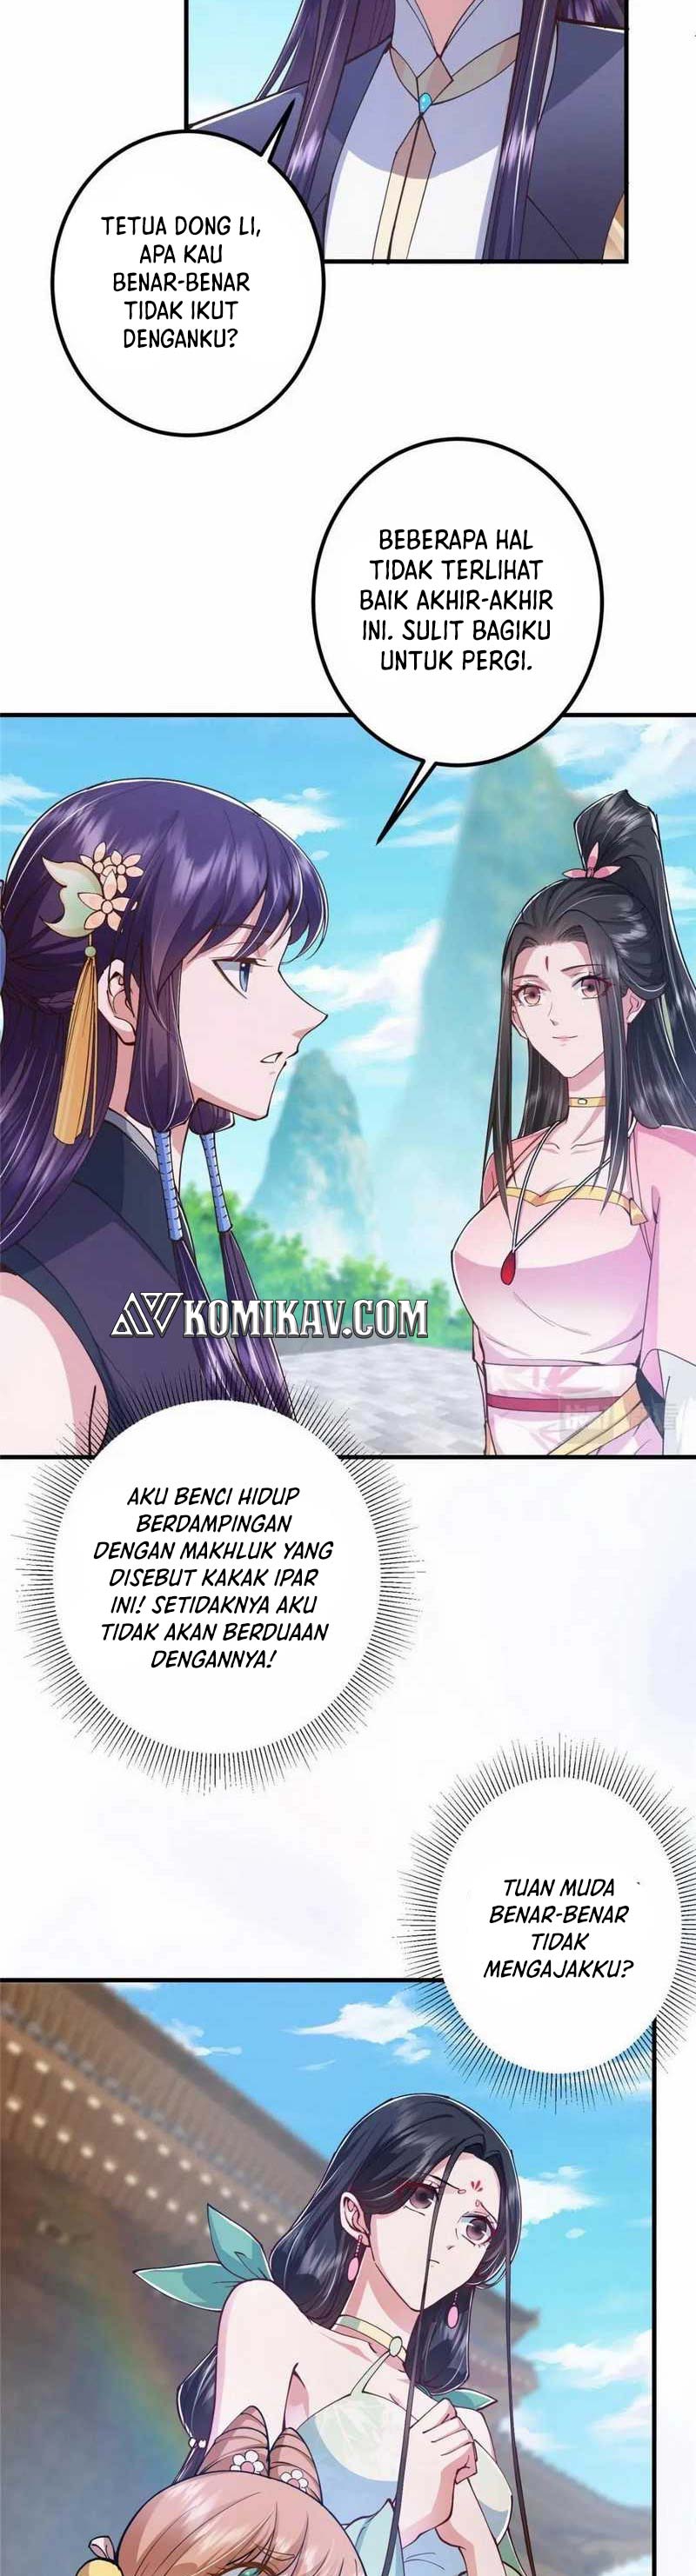 Keep A Low Profile, Sect Leader Chapter 209 Bahasa Indonesia